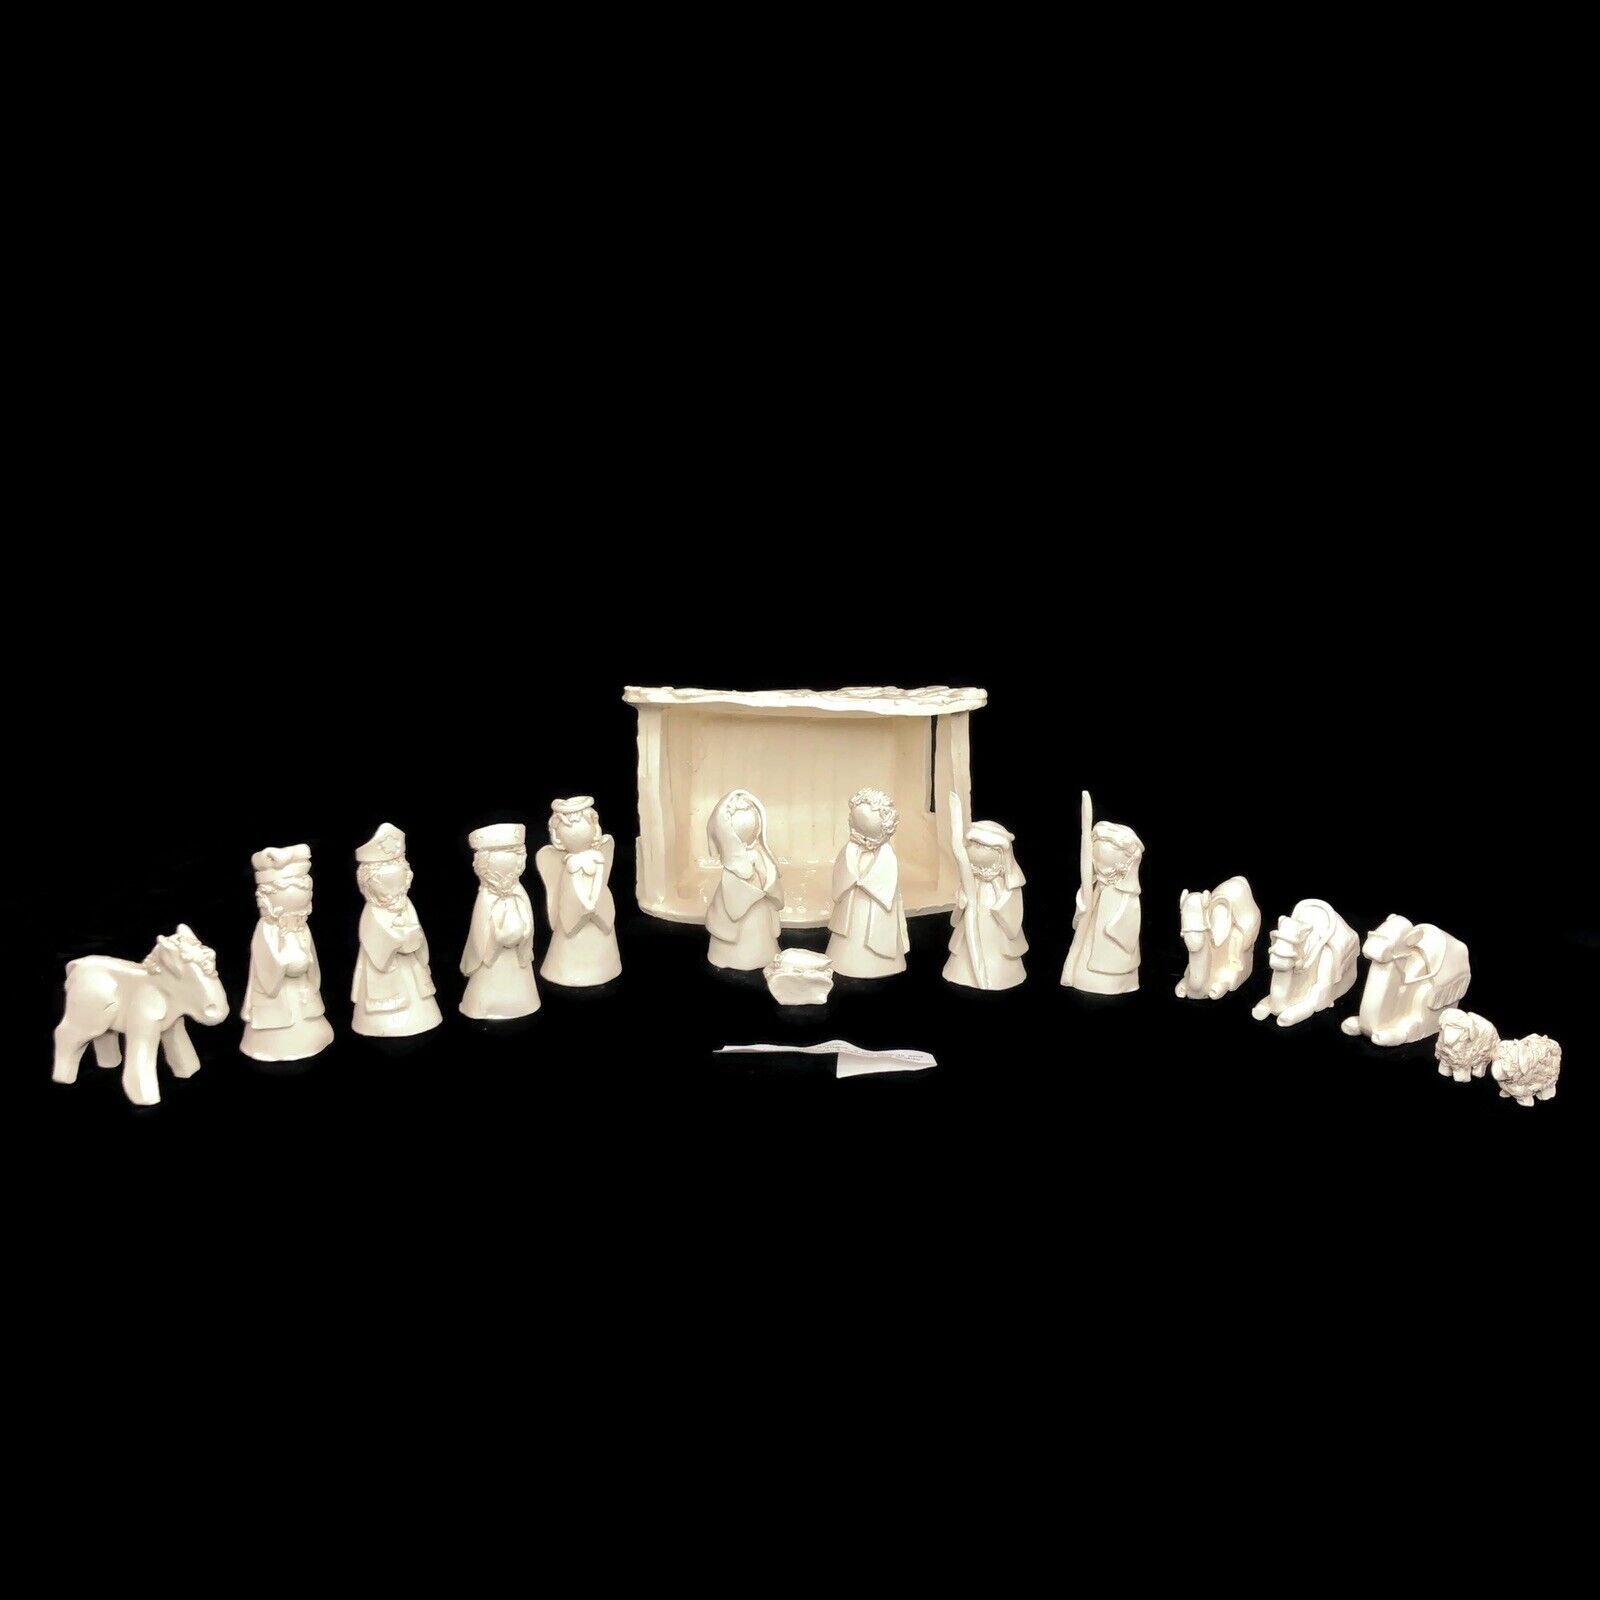 Handmade 15 Piece Glazed Clay Pottery Christmas Nativity Figures Set with Stable